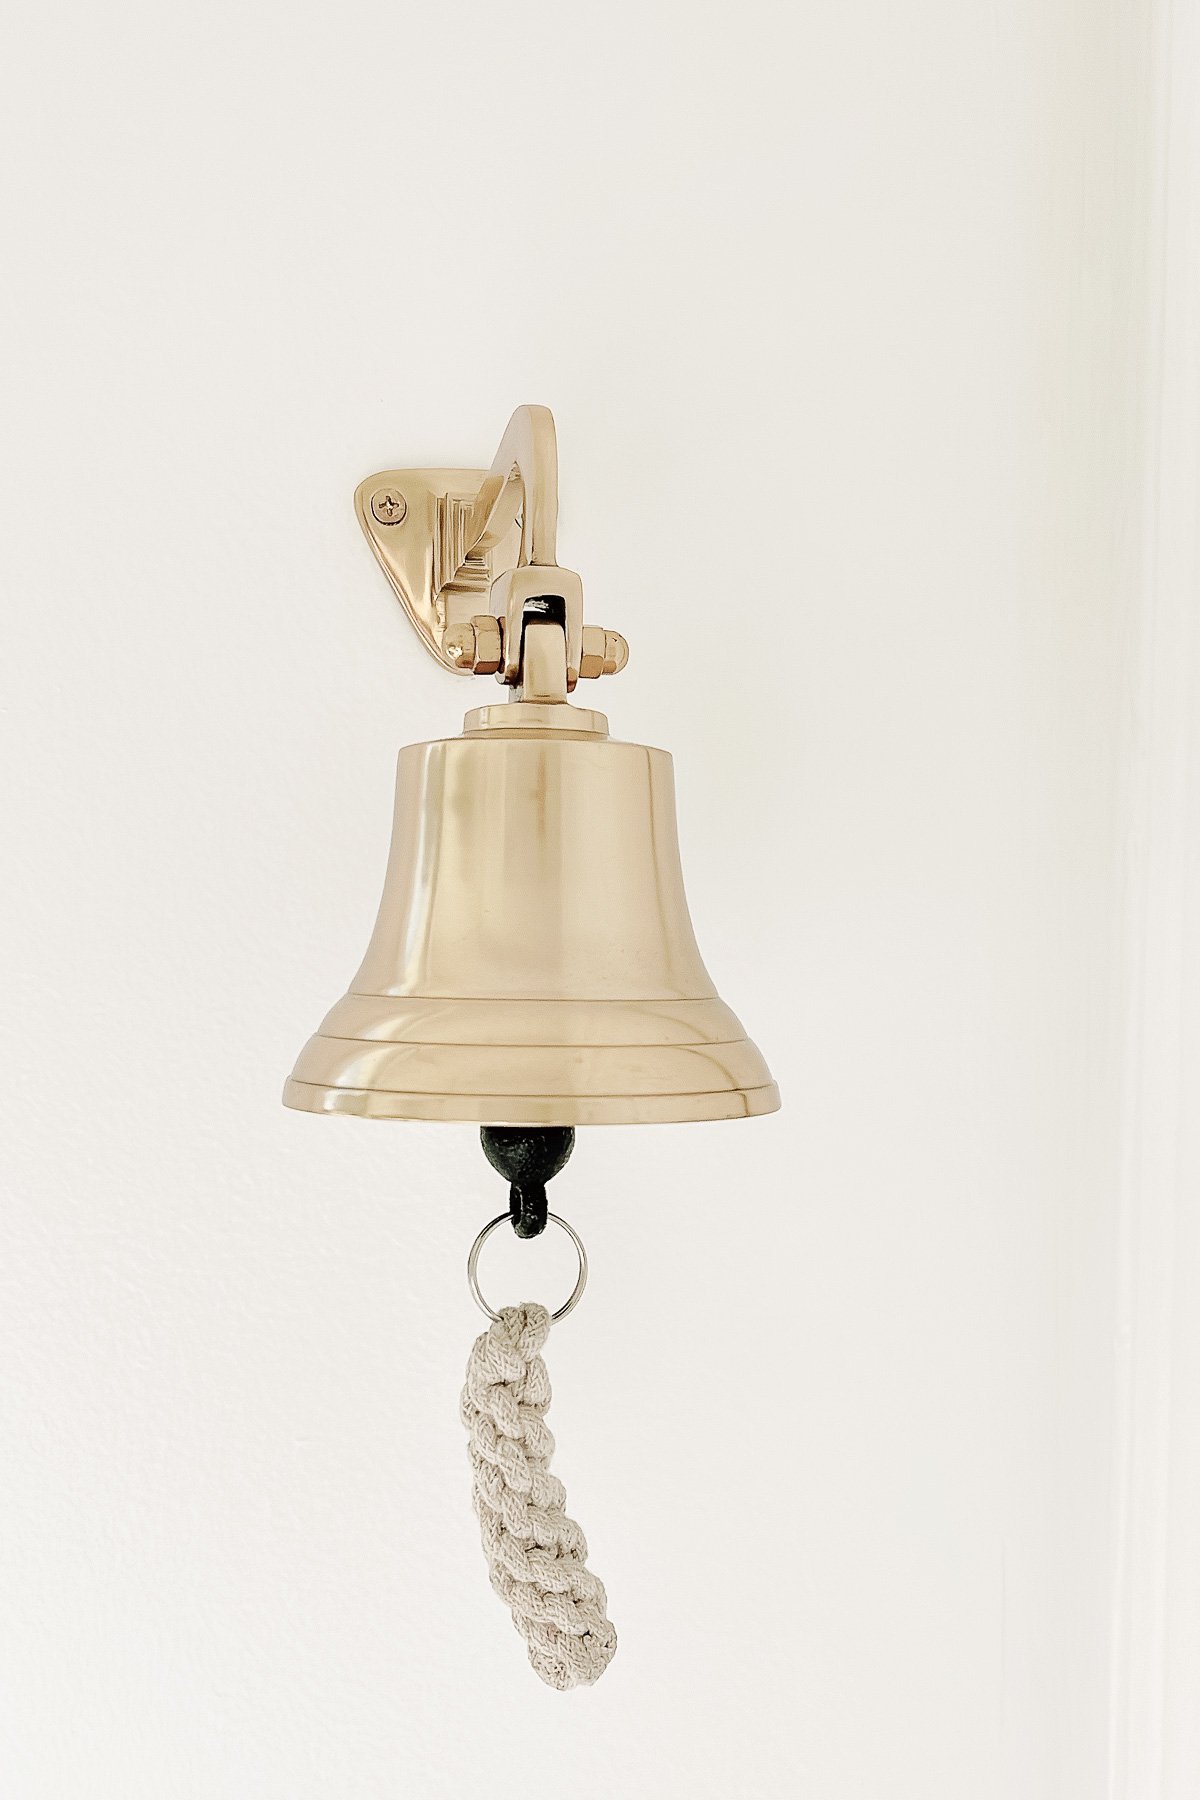 A brass bell hanging on a white wall.